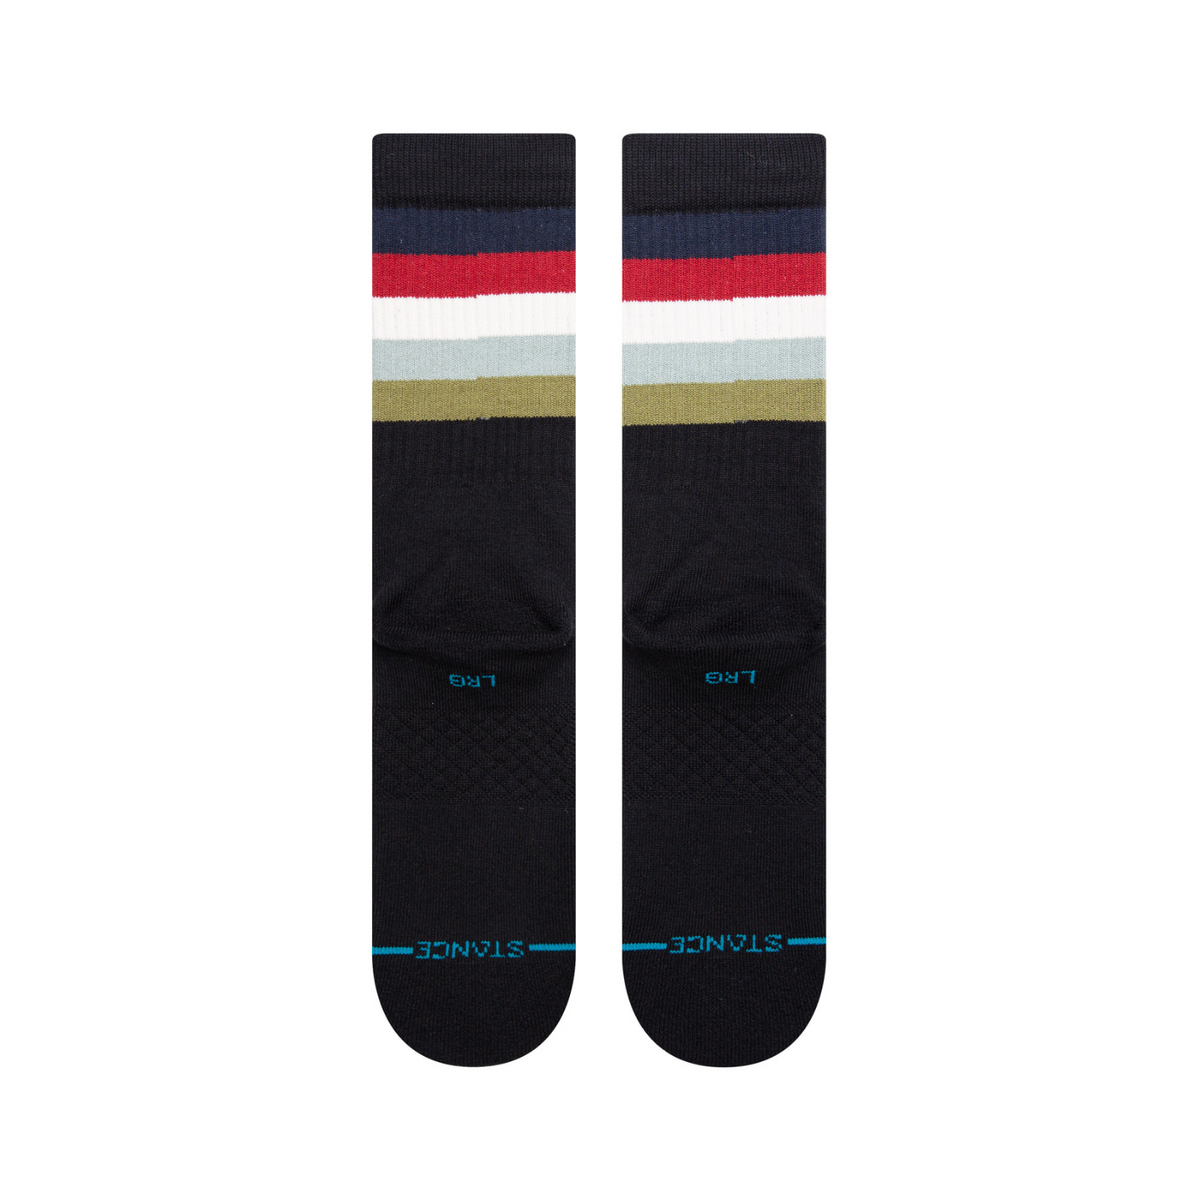 Bottom of Stance Maliboo men&#39;s crew sock featuring black sock with navy, red, white, gray, and olive stripes at cuff. 